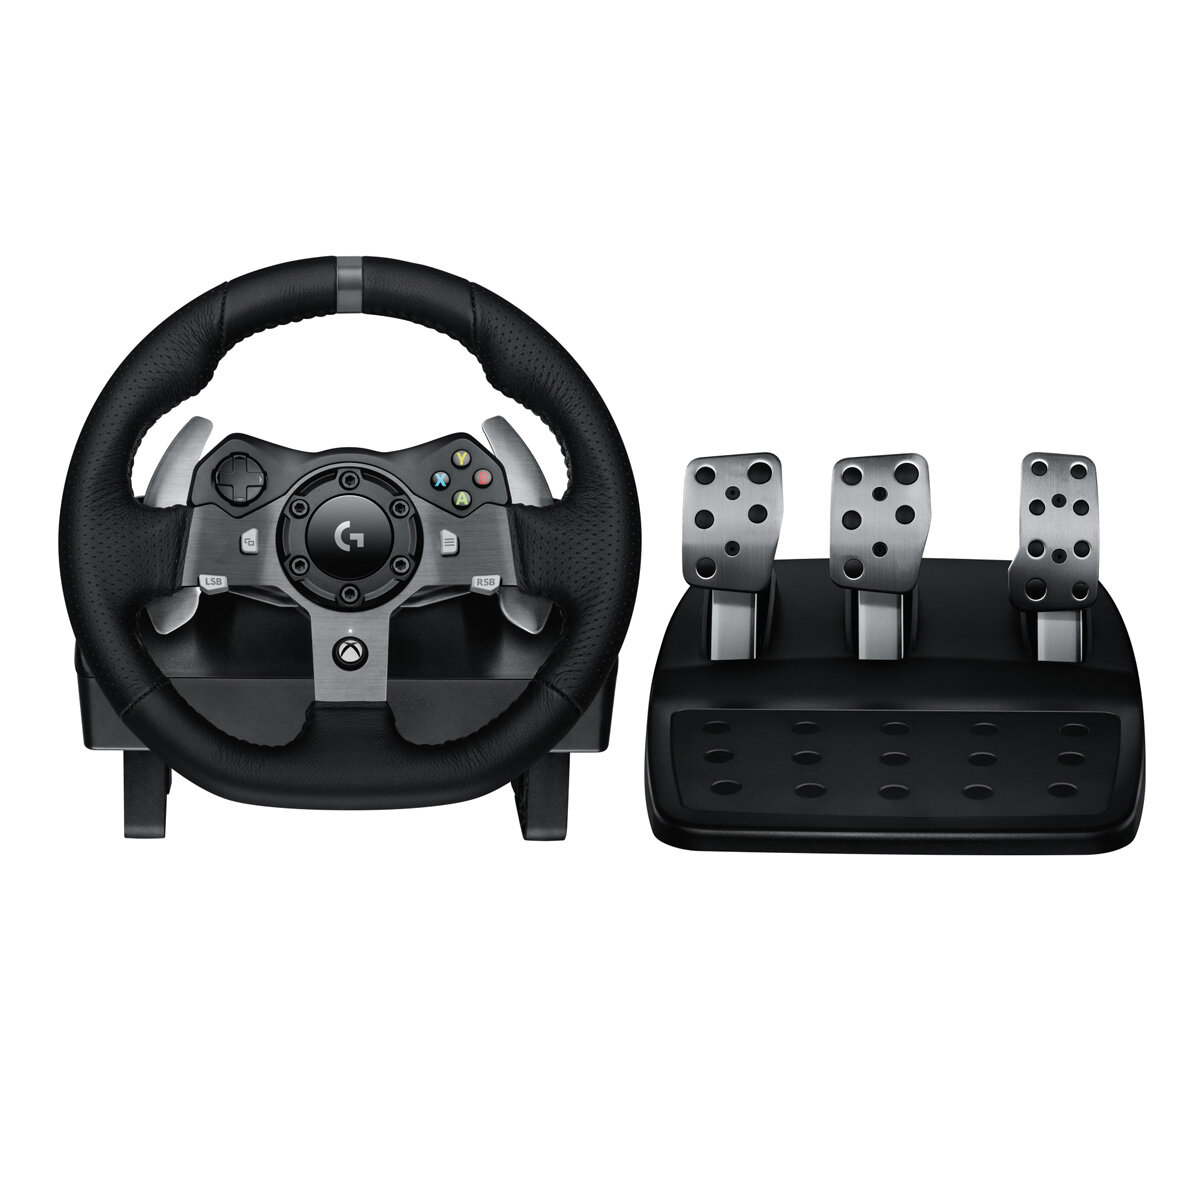 Logitech G920 Racing Wheel and Shifter Bundle for Xbox One and PC (Renewed)